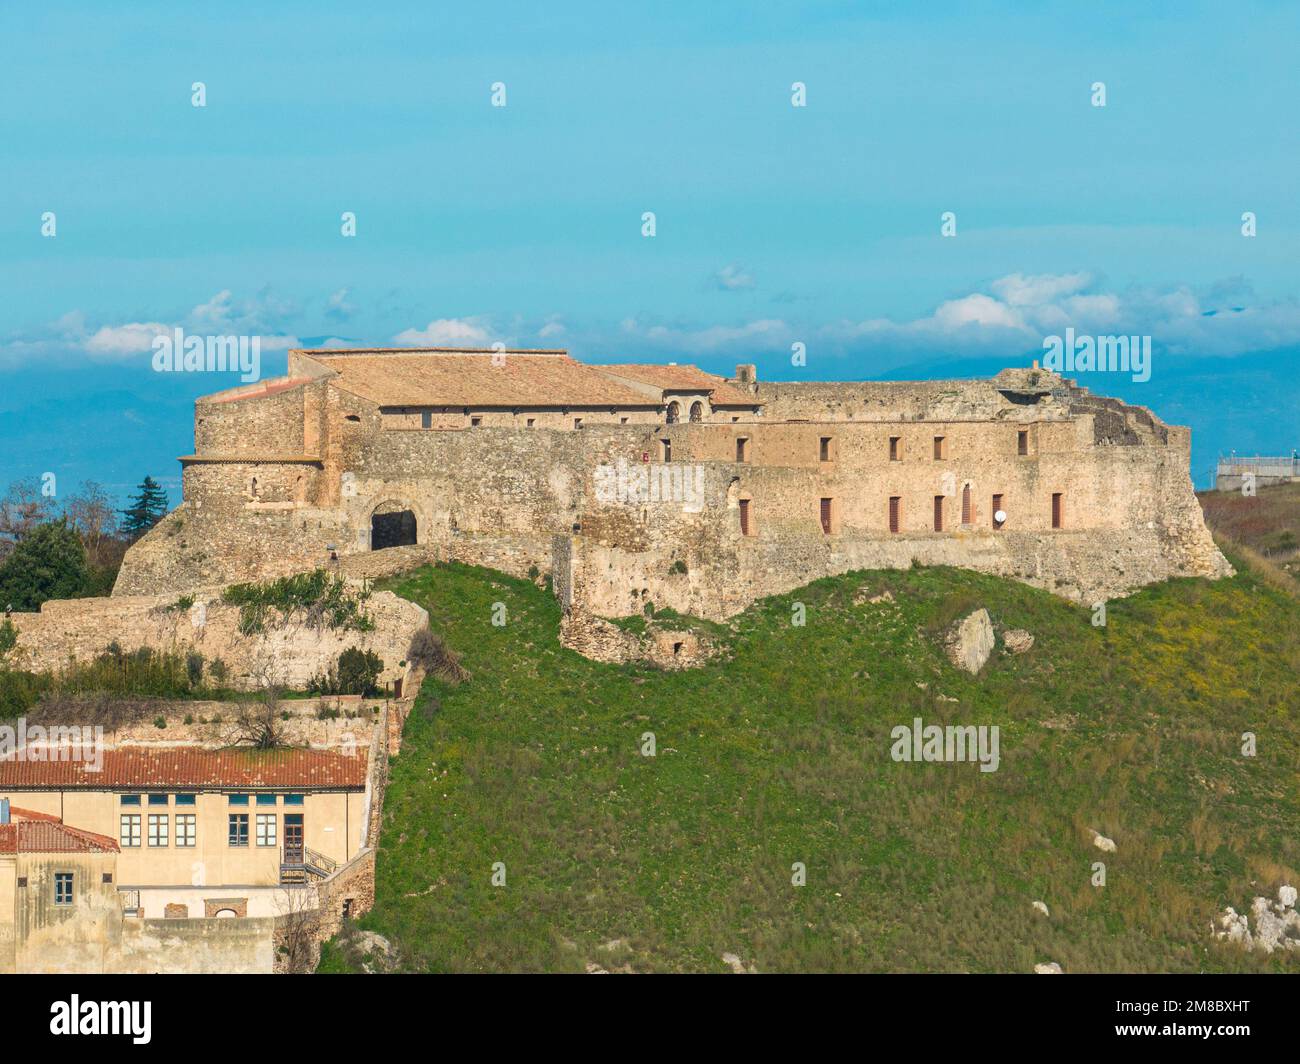 Aerial view of the Norman Swabian castle, Vibo Valentia, Calabria, Italy. City skyline Stock Photo